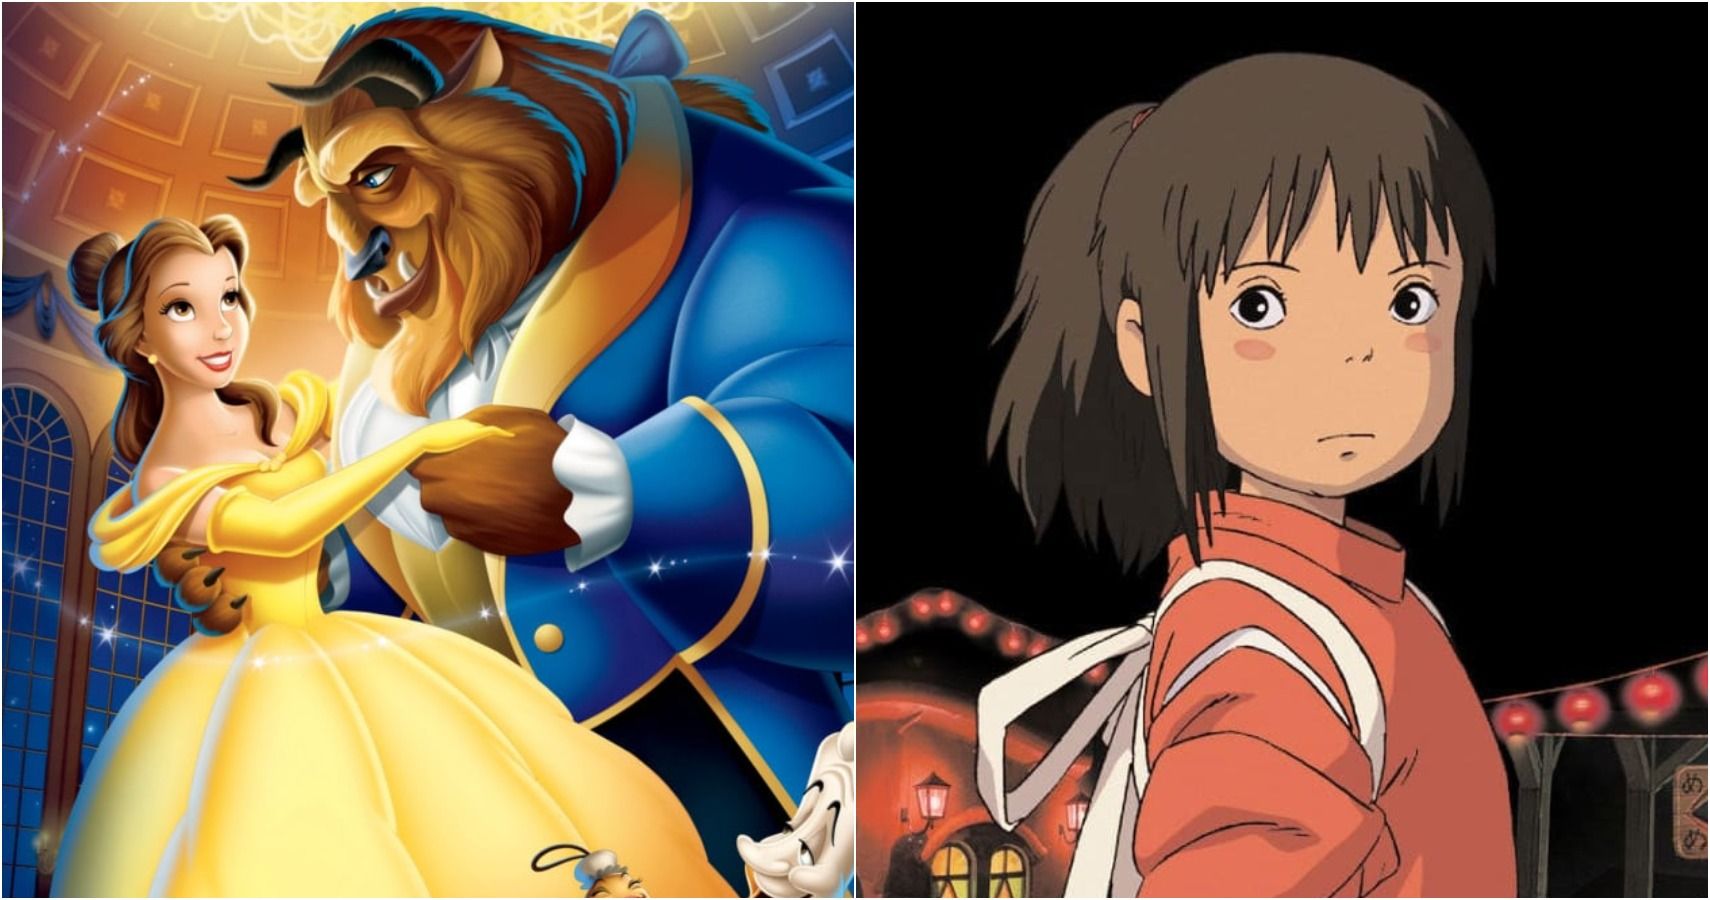 Top 10 Highest-Grossing Hand-Drawn Animated Films of All Time